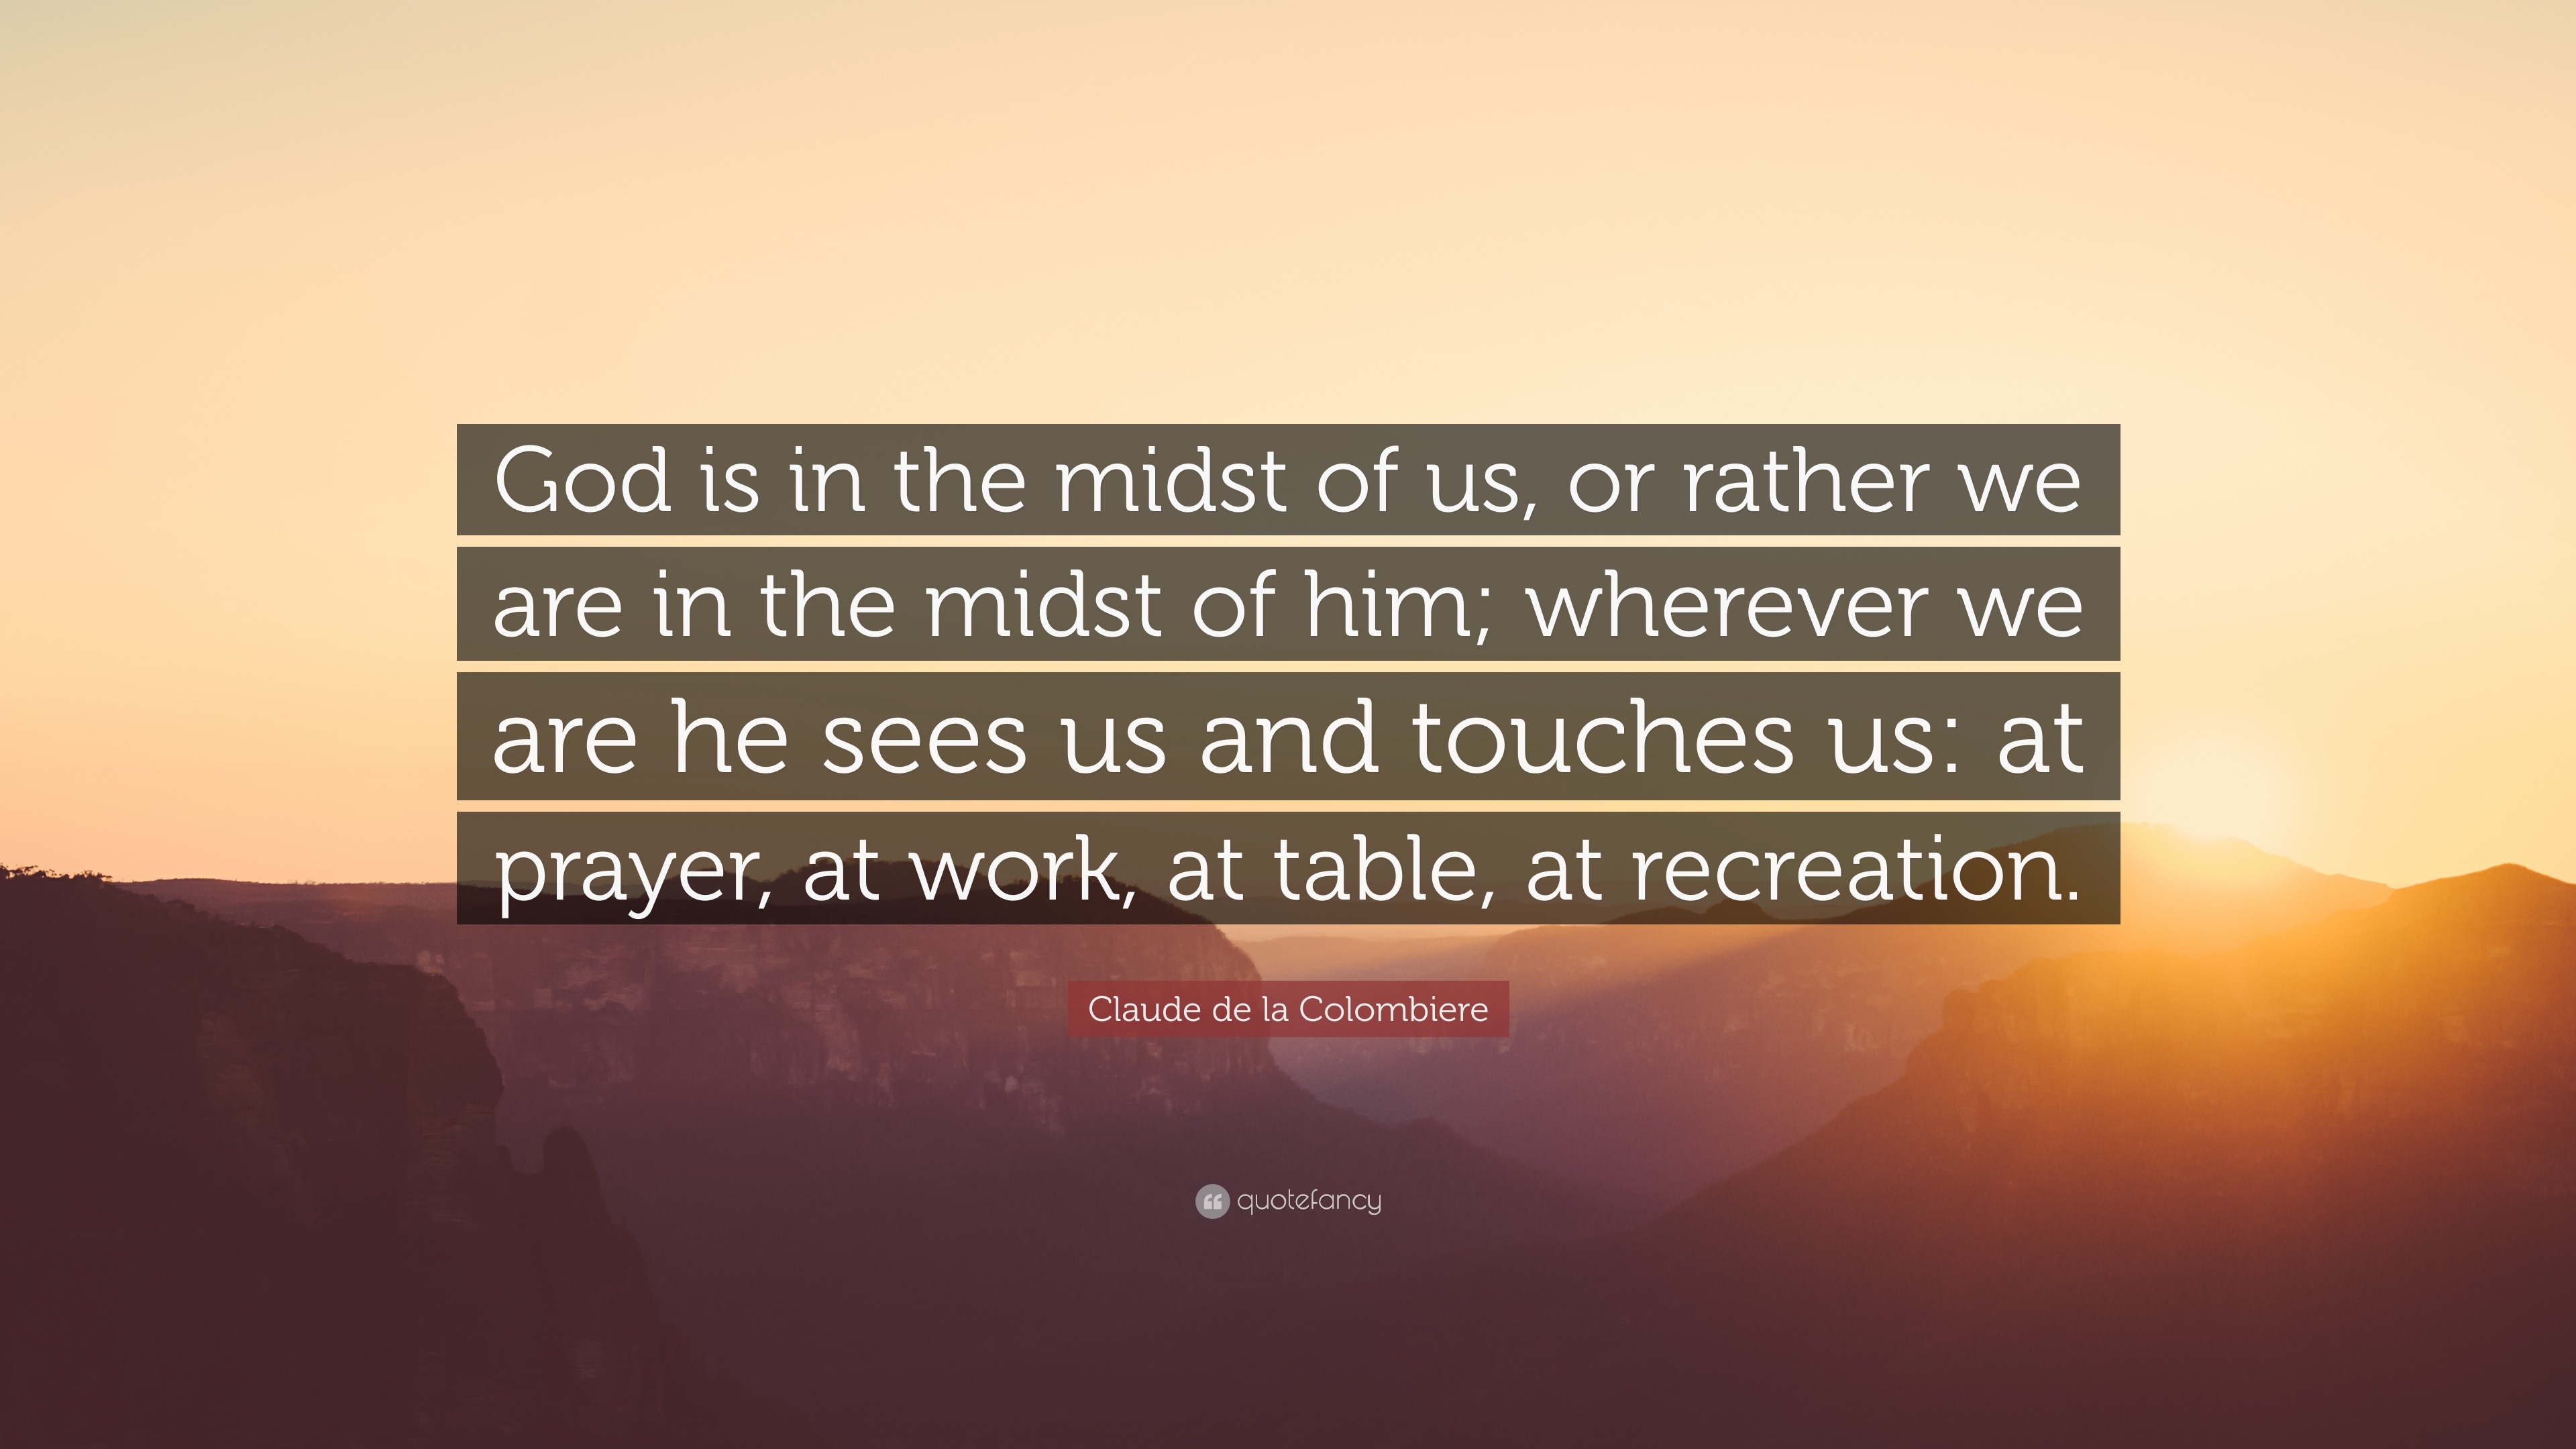 Claude de la Colombiere Quote “God is in the midst of us, or rather we